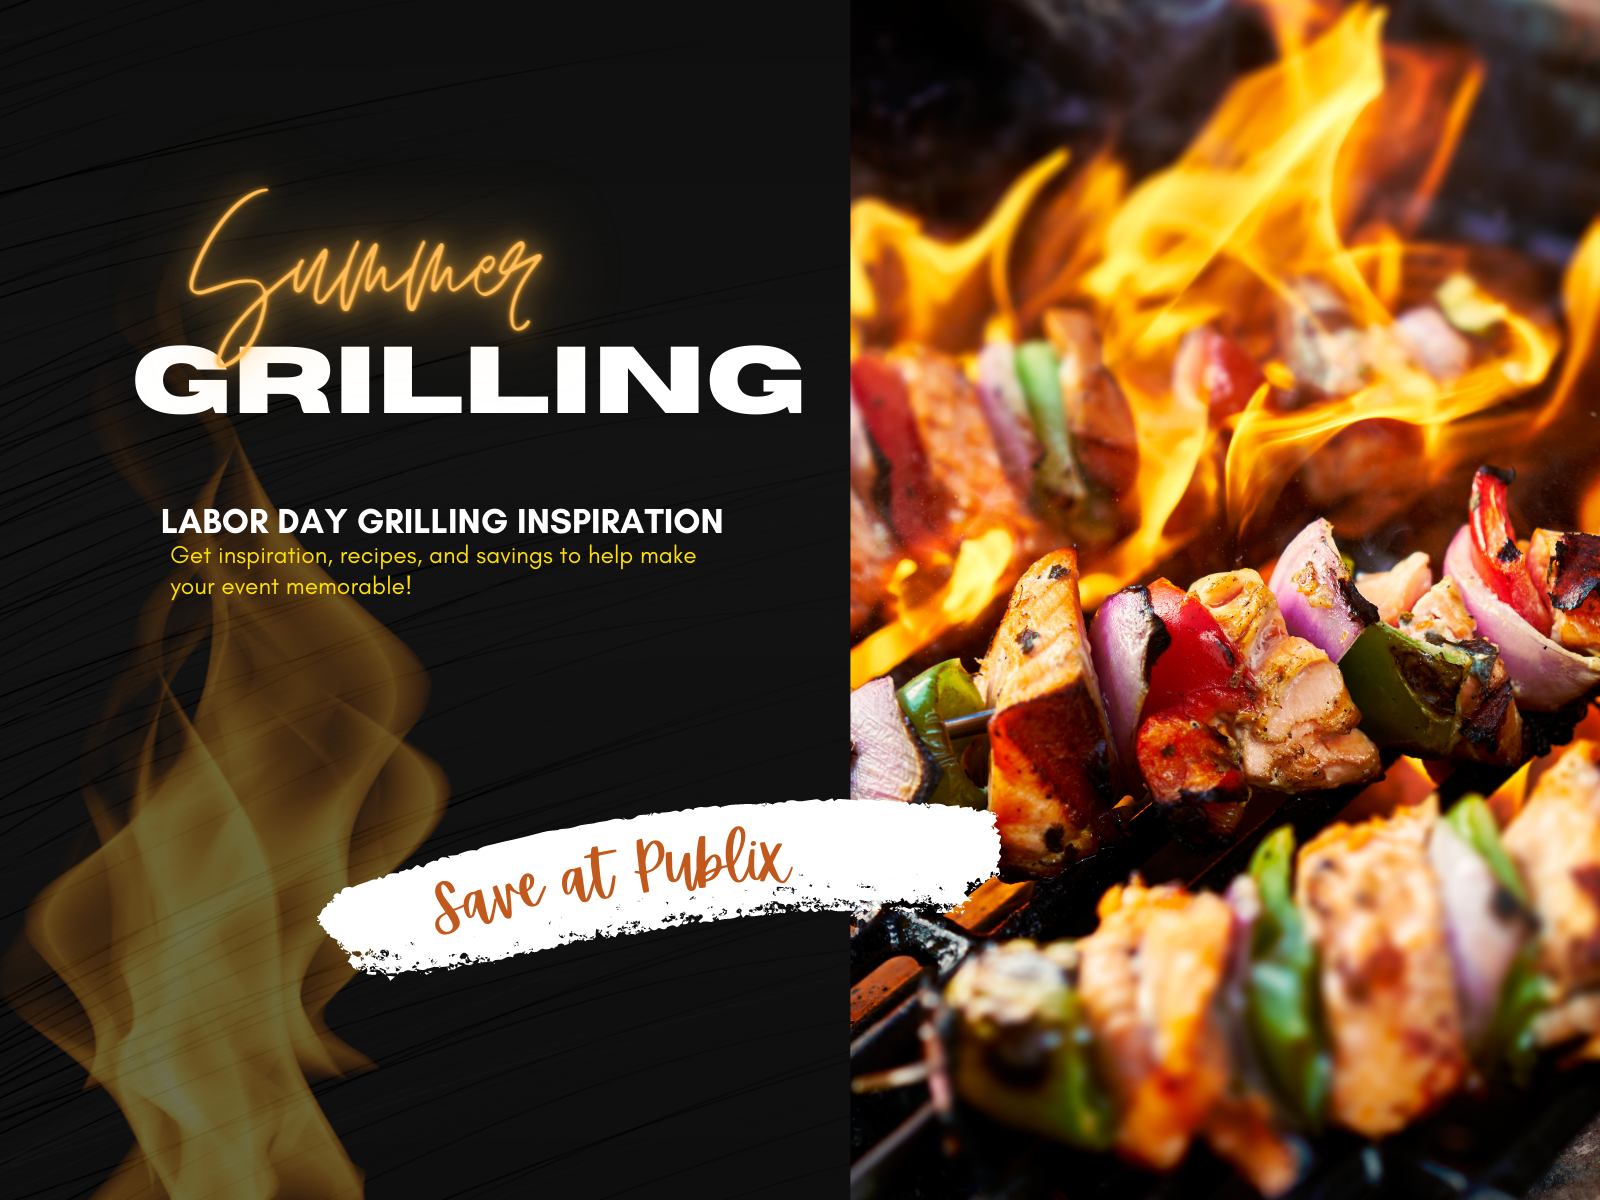 Time To Fire Up The Grill! Get Inspiration, Recipes, And Savings Just In Time For Your Labor Day Celebration!